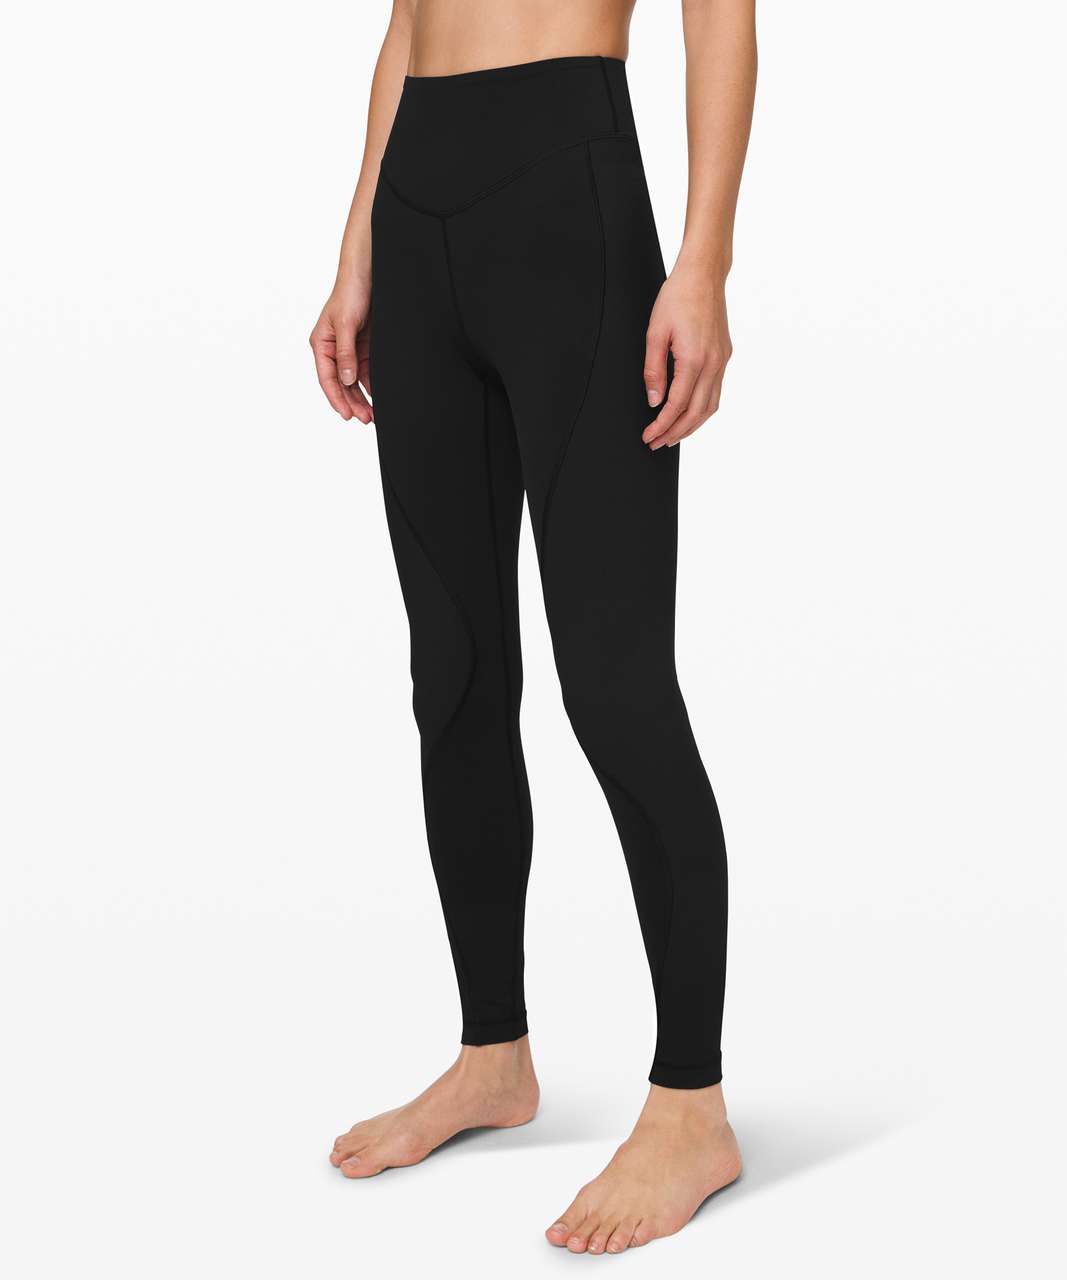 Lululemon Wade the Waters Paddle Tight - Black